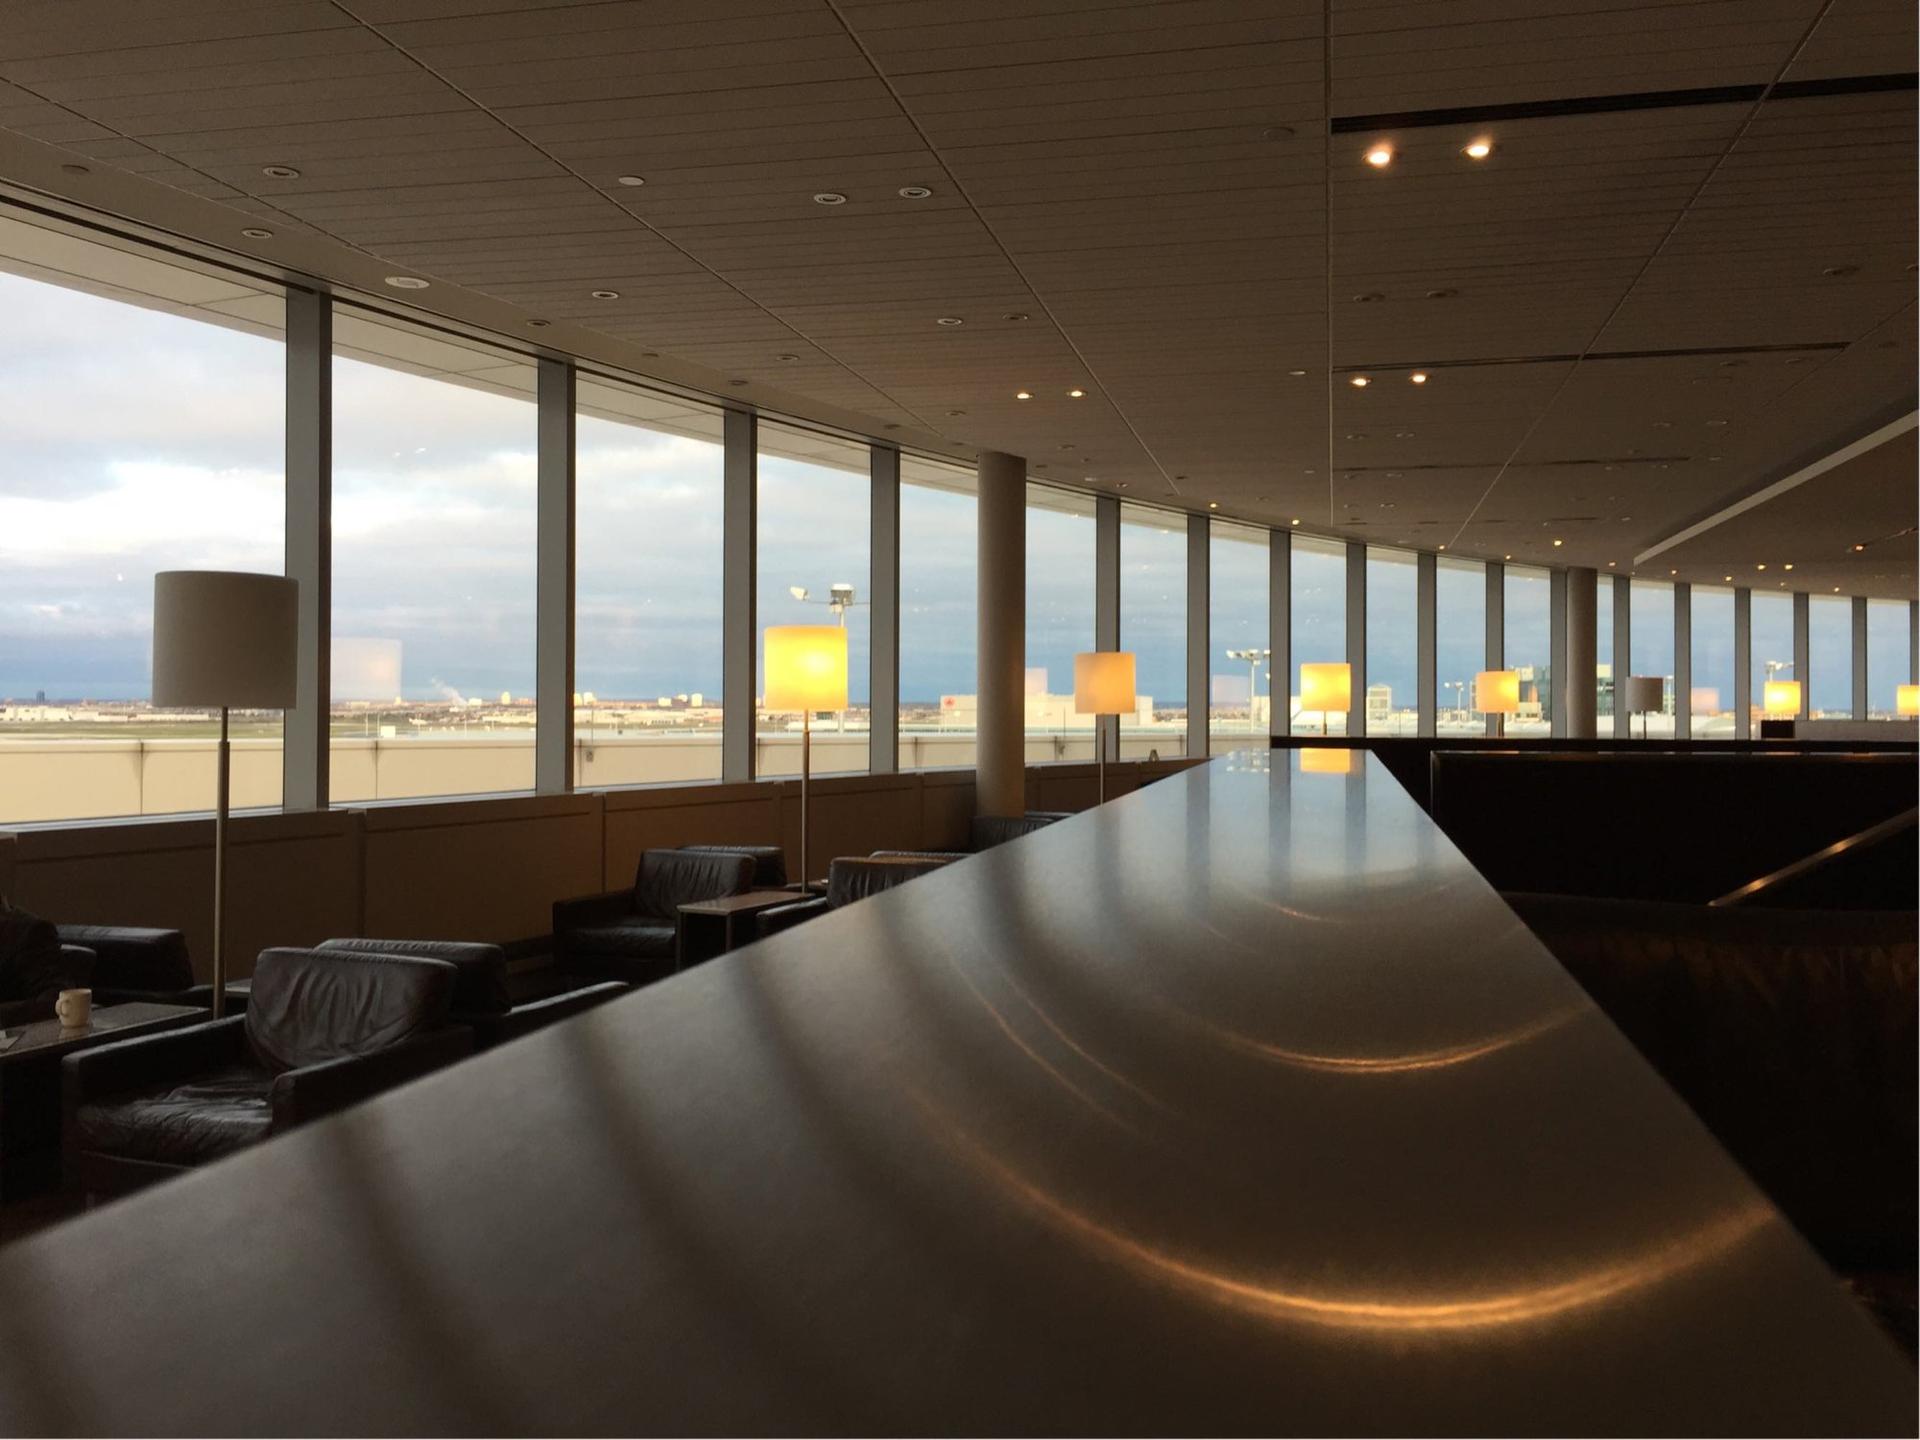 Air Canada Maple Leaf Lounge image 19 of 21